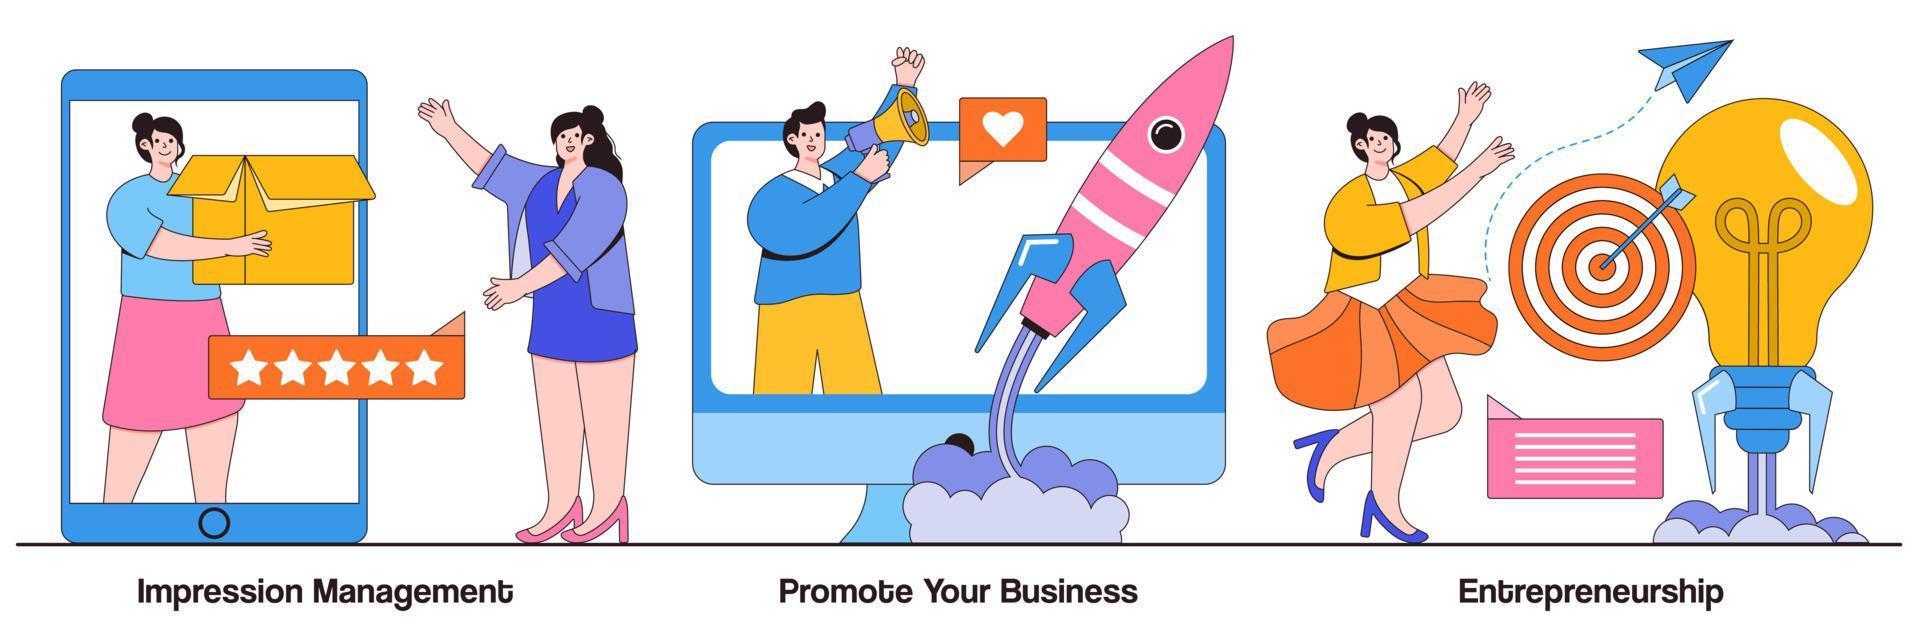 Impression management, promote your business, entrepreneurship concept with tiny people. Business success vector illustration set. Personal brand strategy, social interaction and influence metaphor